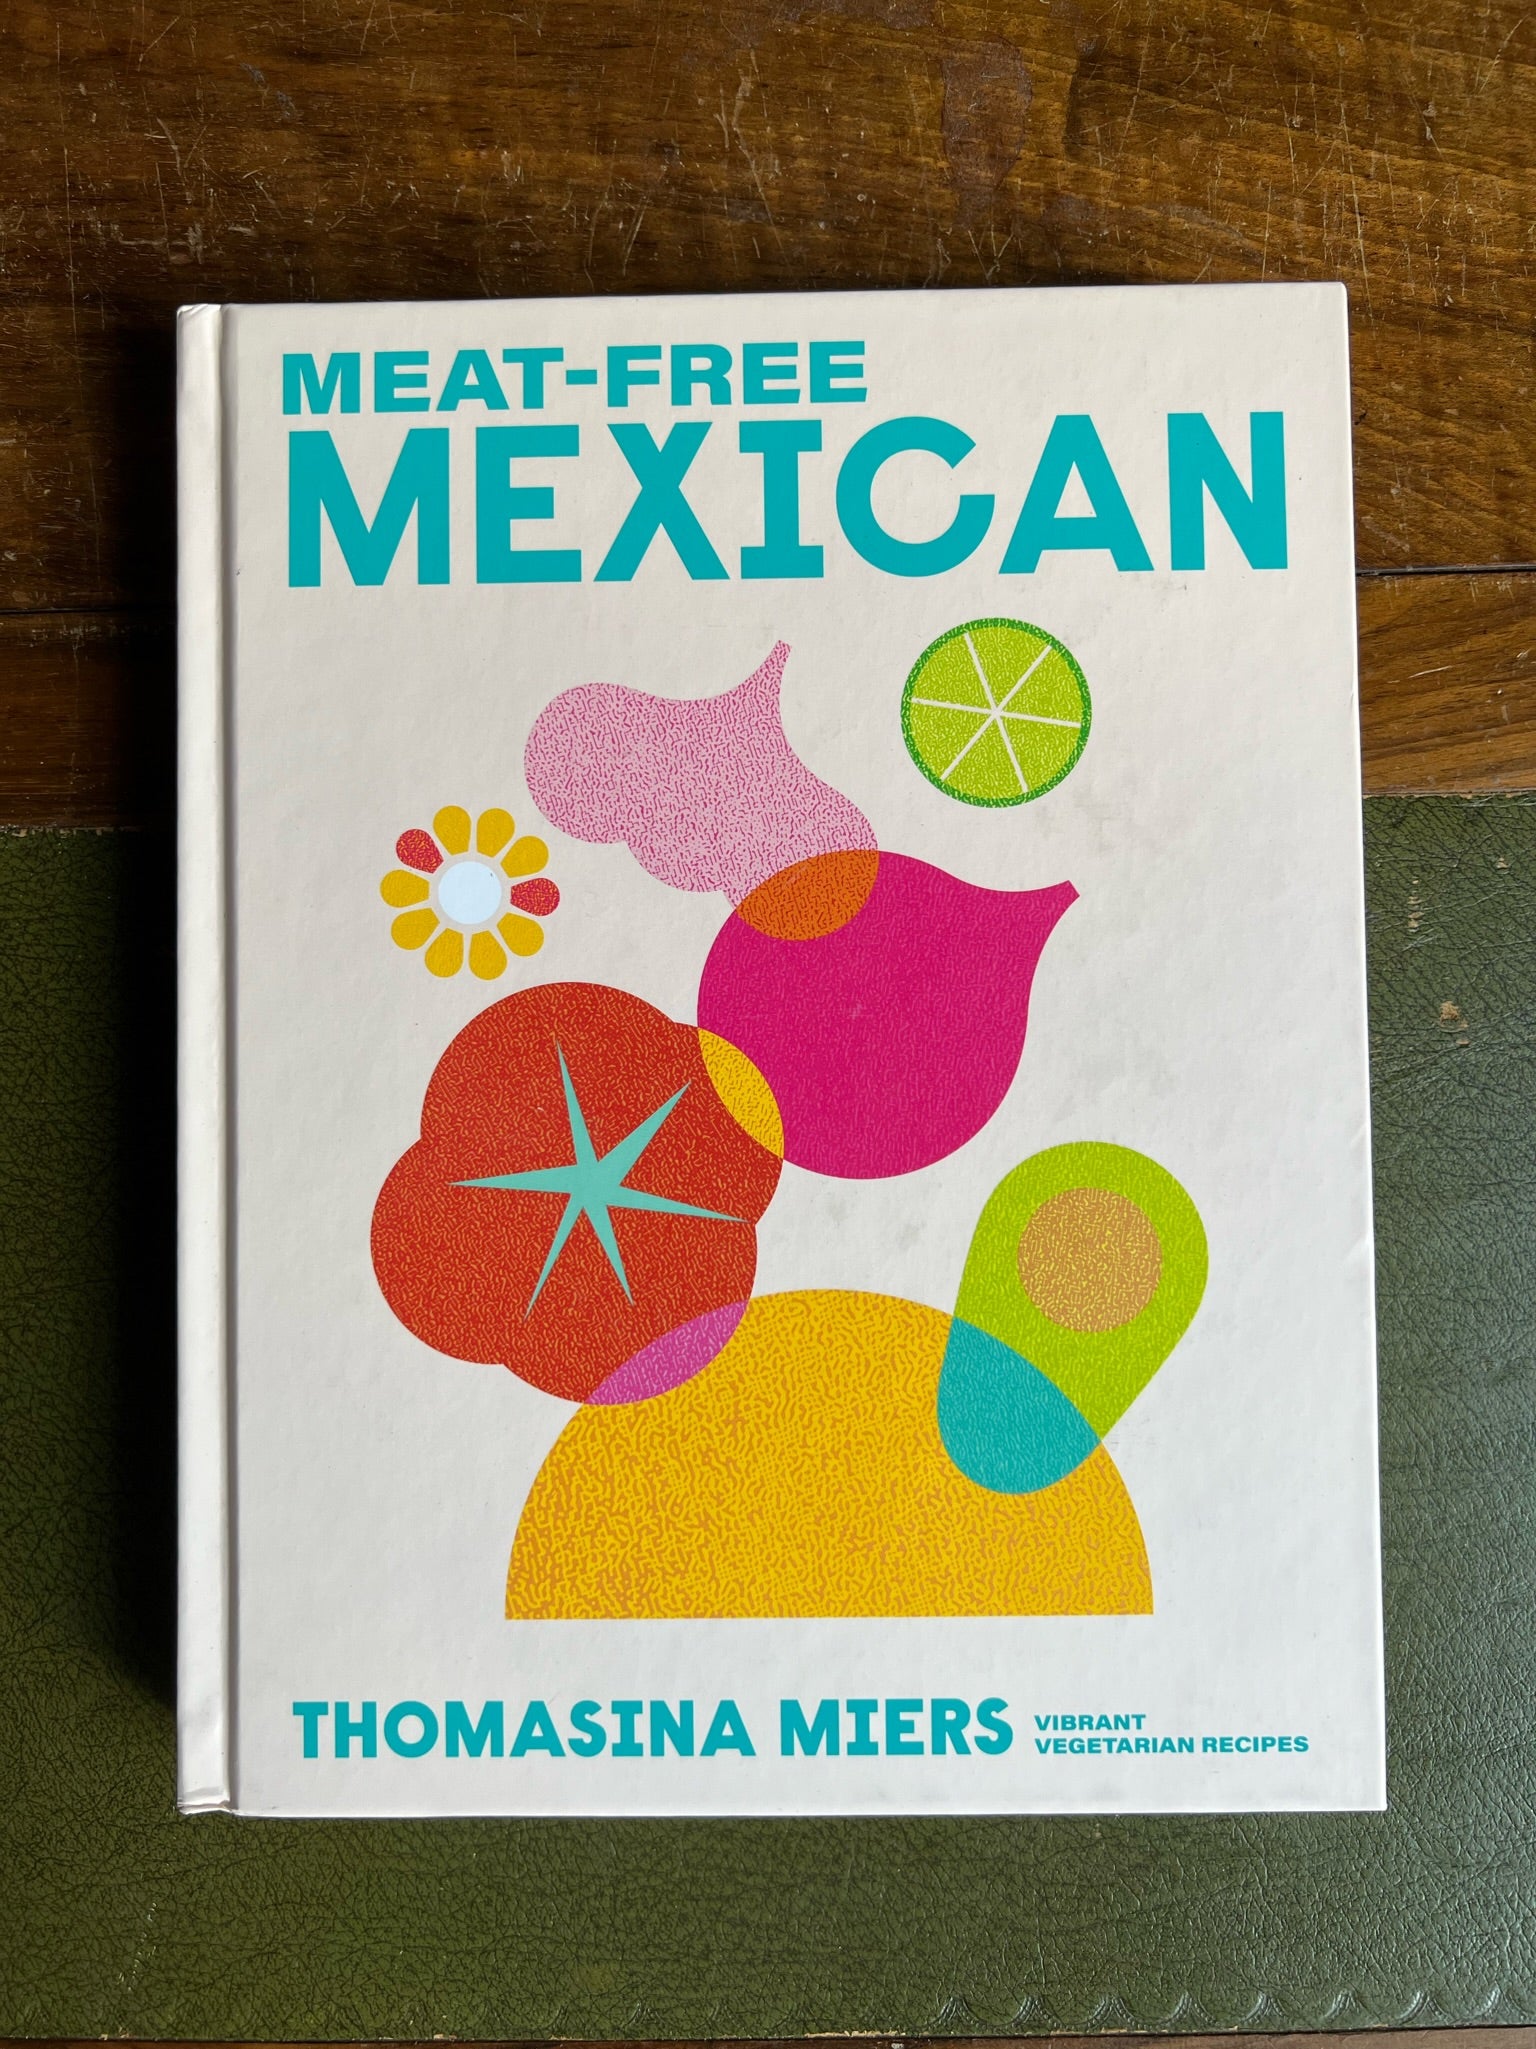 Meat-free Mexican: Vibrant Vegetarian Recipes by Thomasina Miers